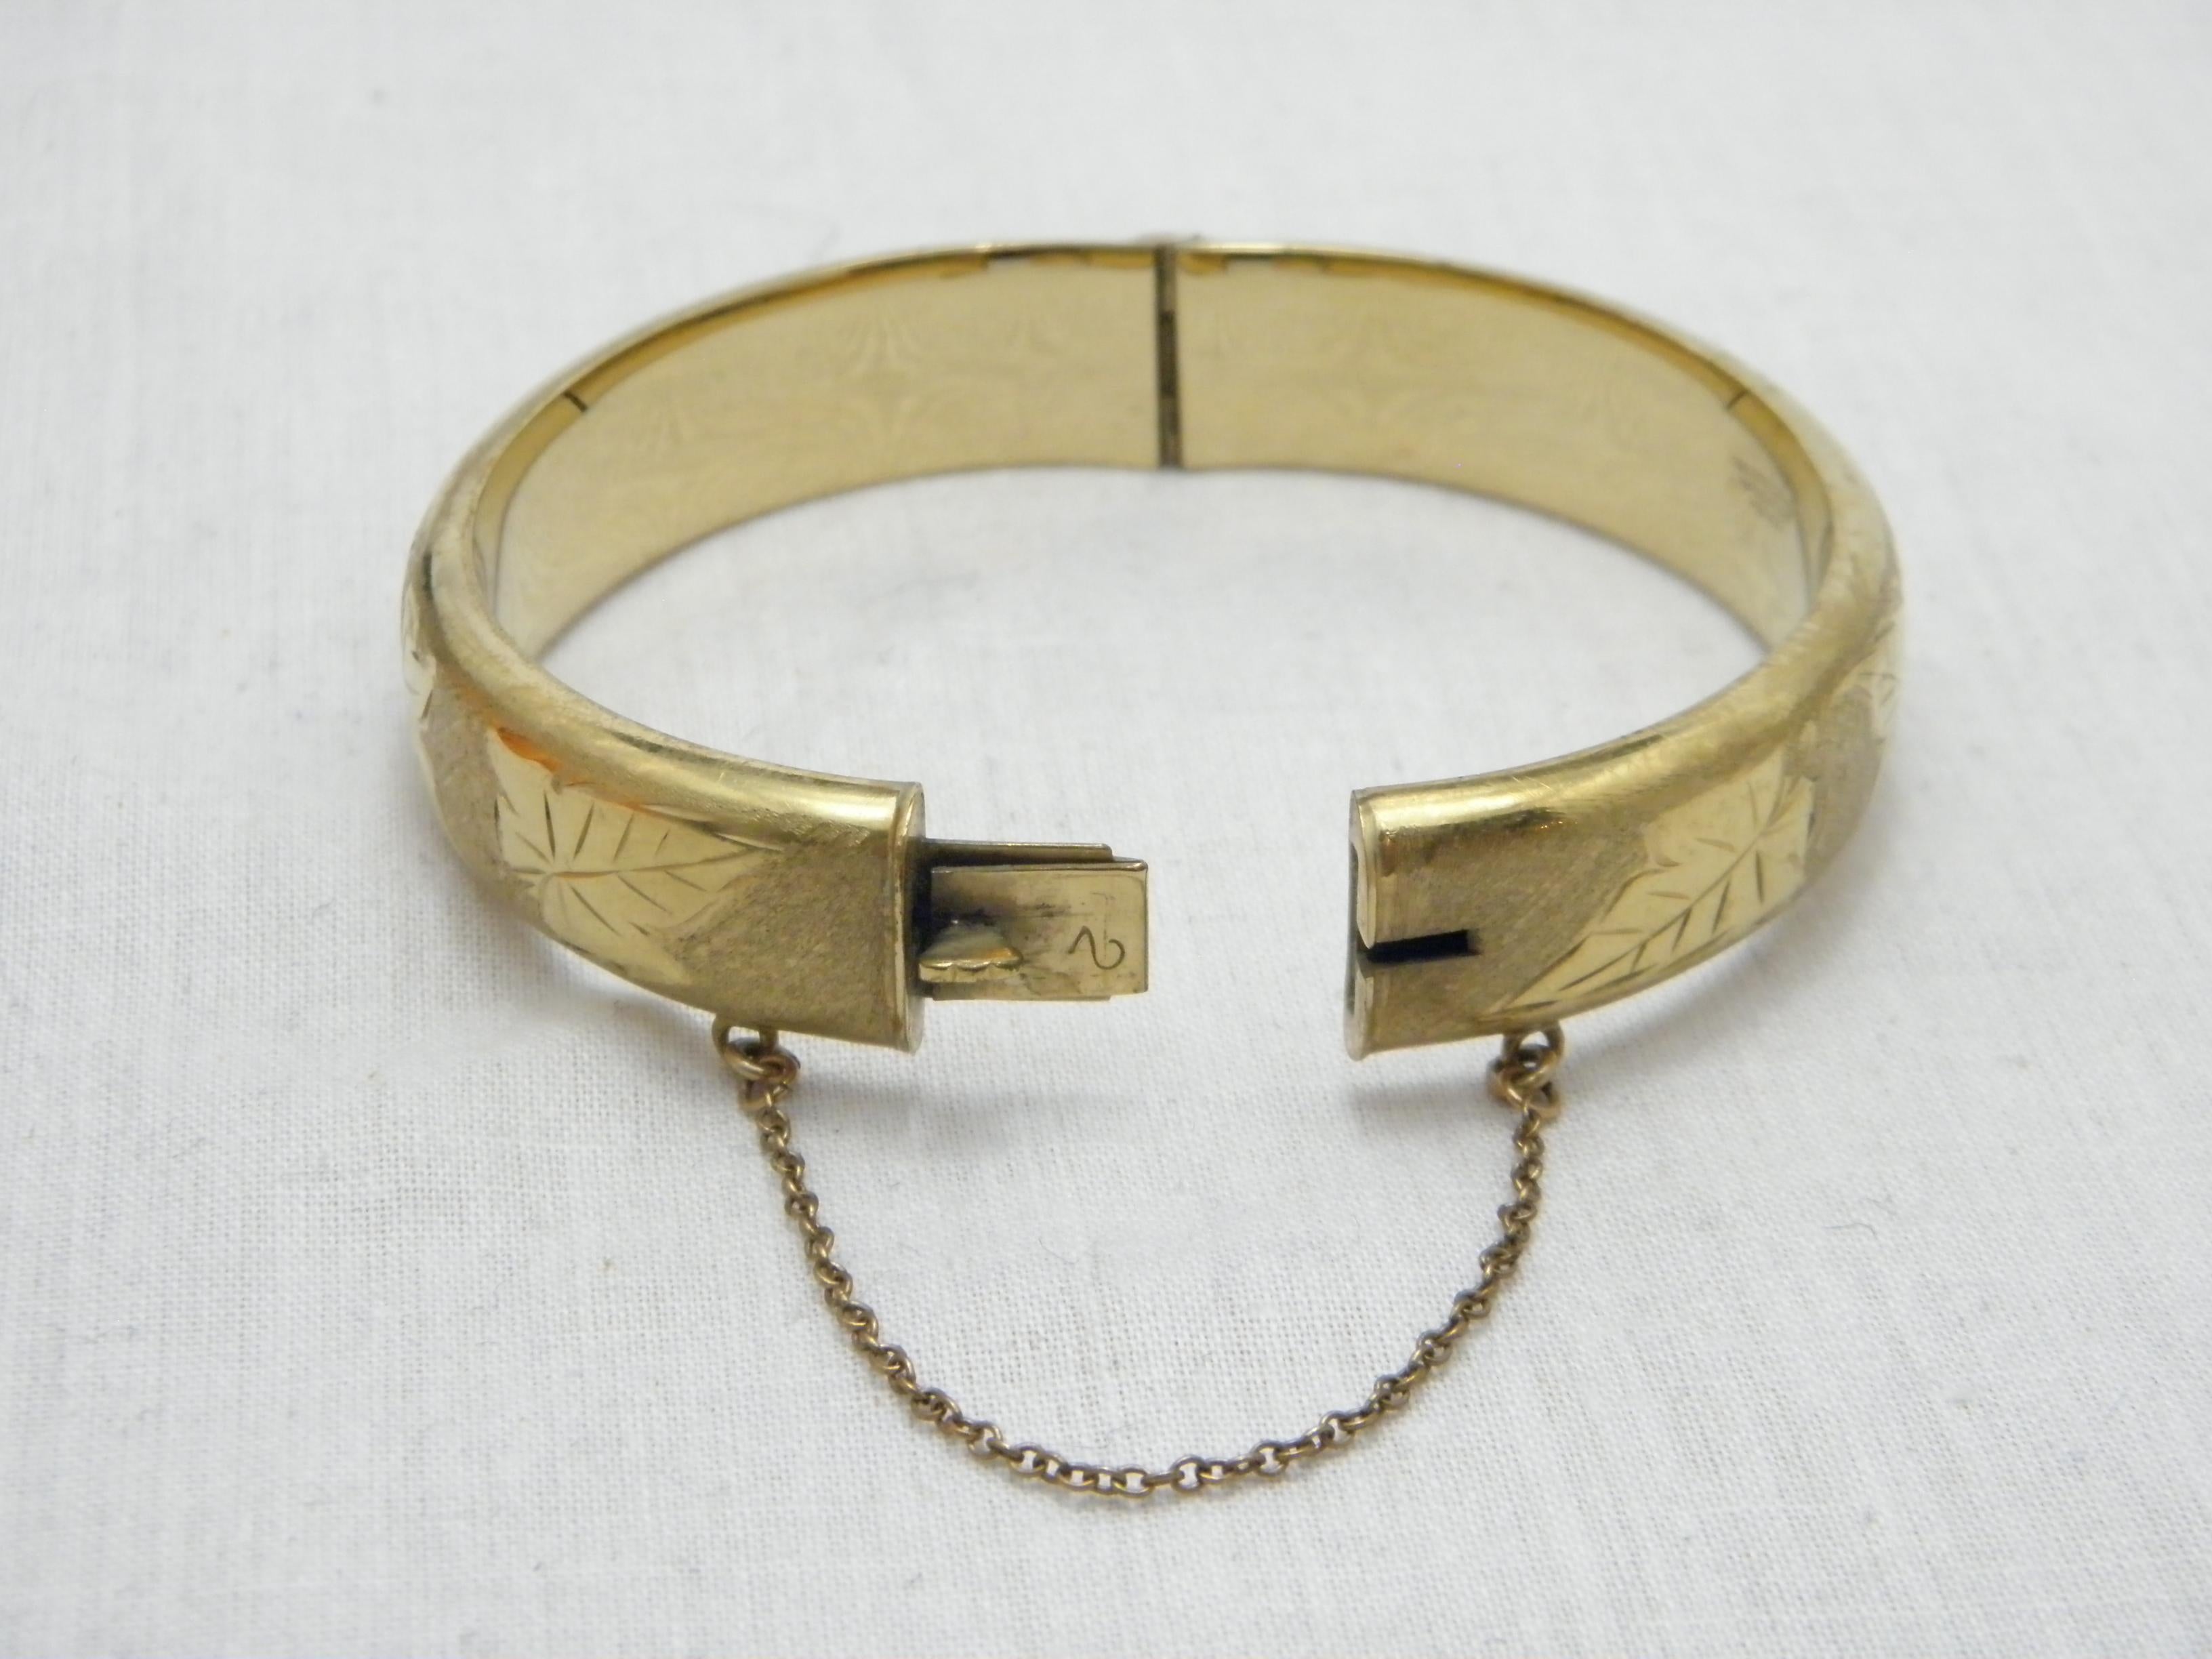 Vintage 12ct Gold 'Rolled' Floral Cuff Bracelet Bangle 500 Purity Heavy 21g For Sale 2